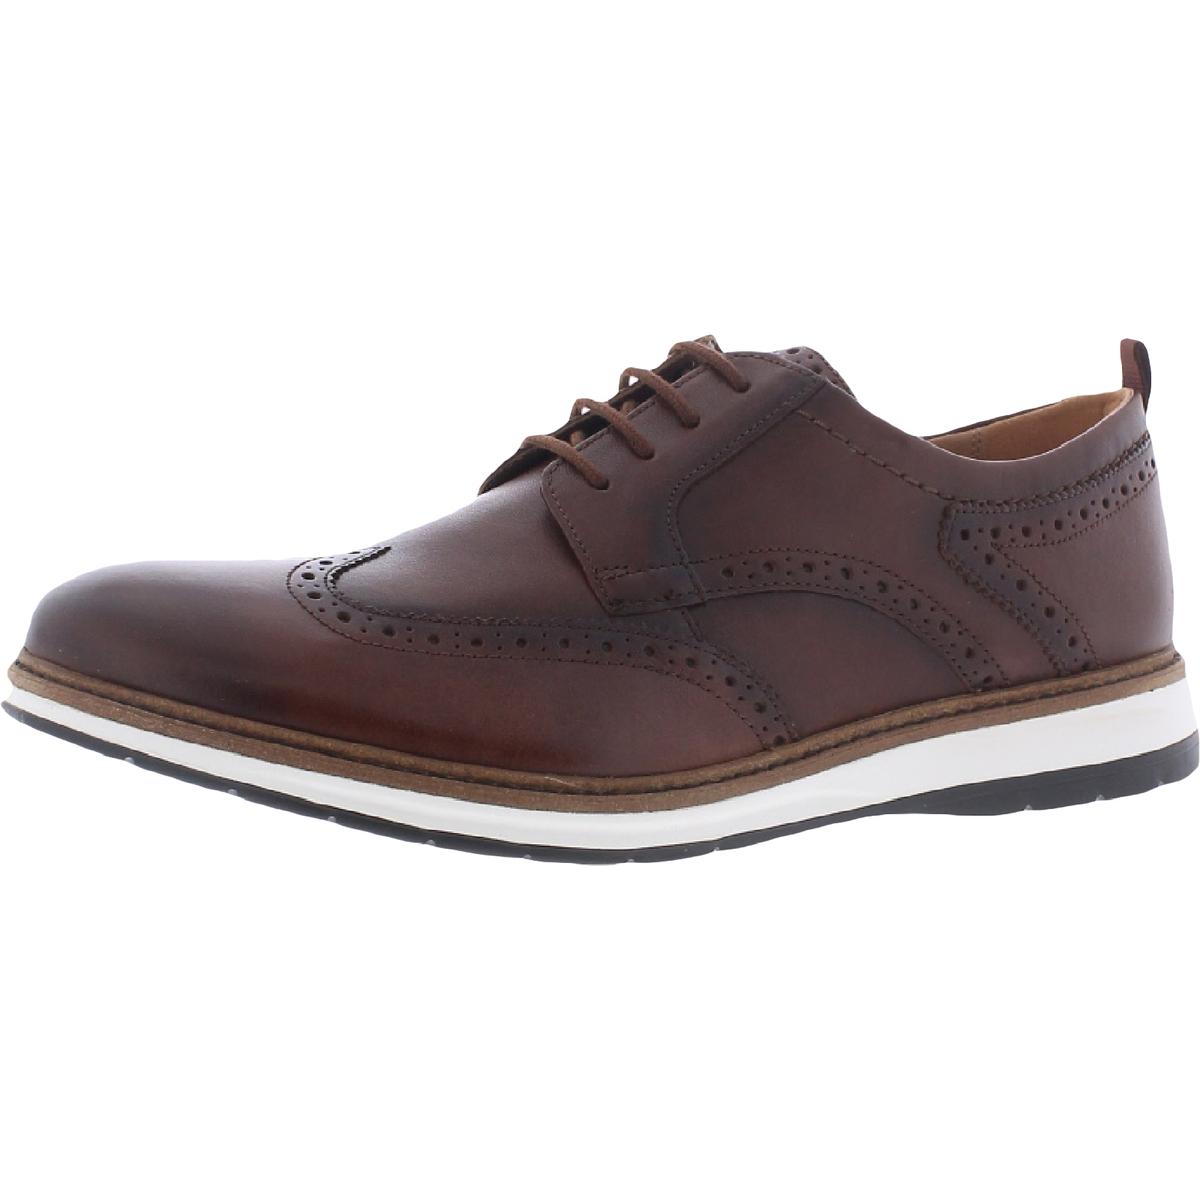 Clarks Chantry Wing Mens Leather Lace Up Oxfords